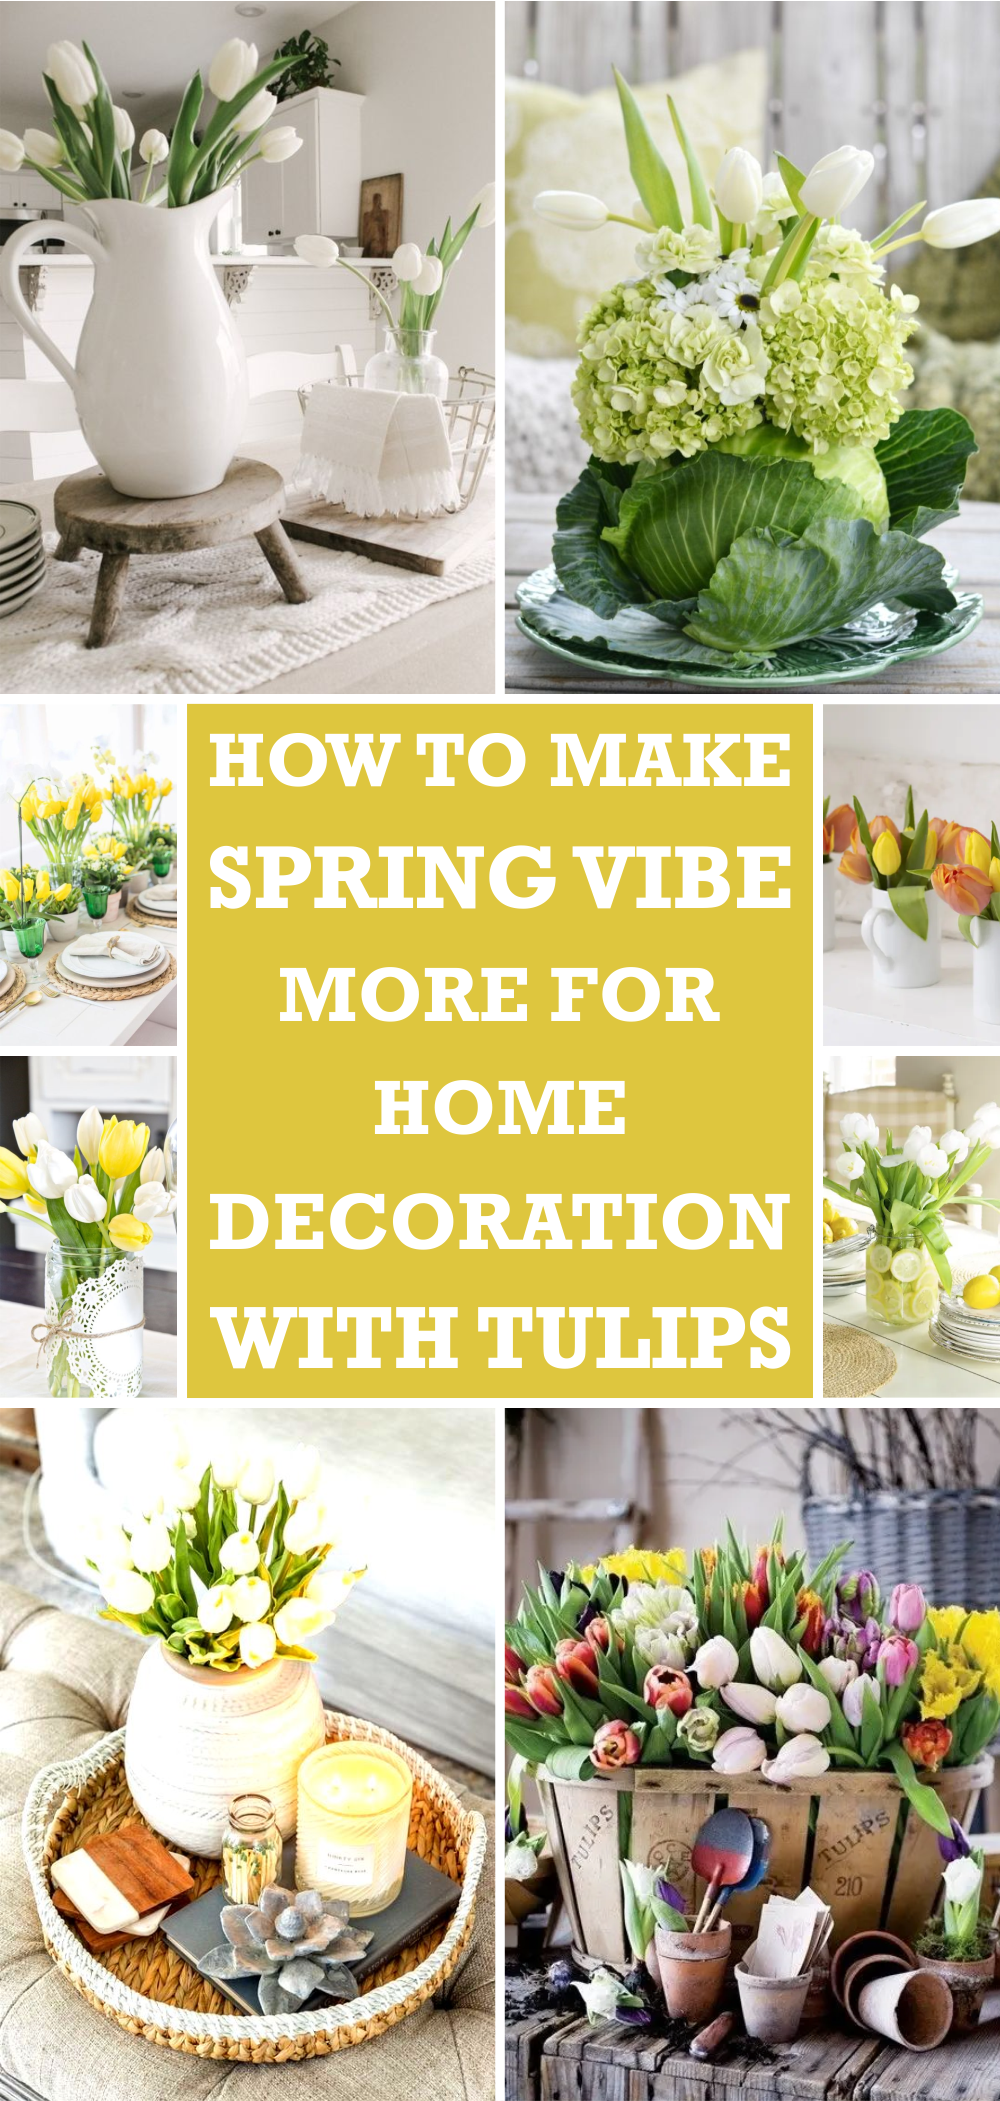 How to Make Spring Vibe More for Home Decoration with Tulips